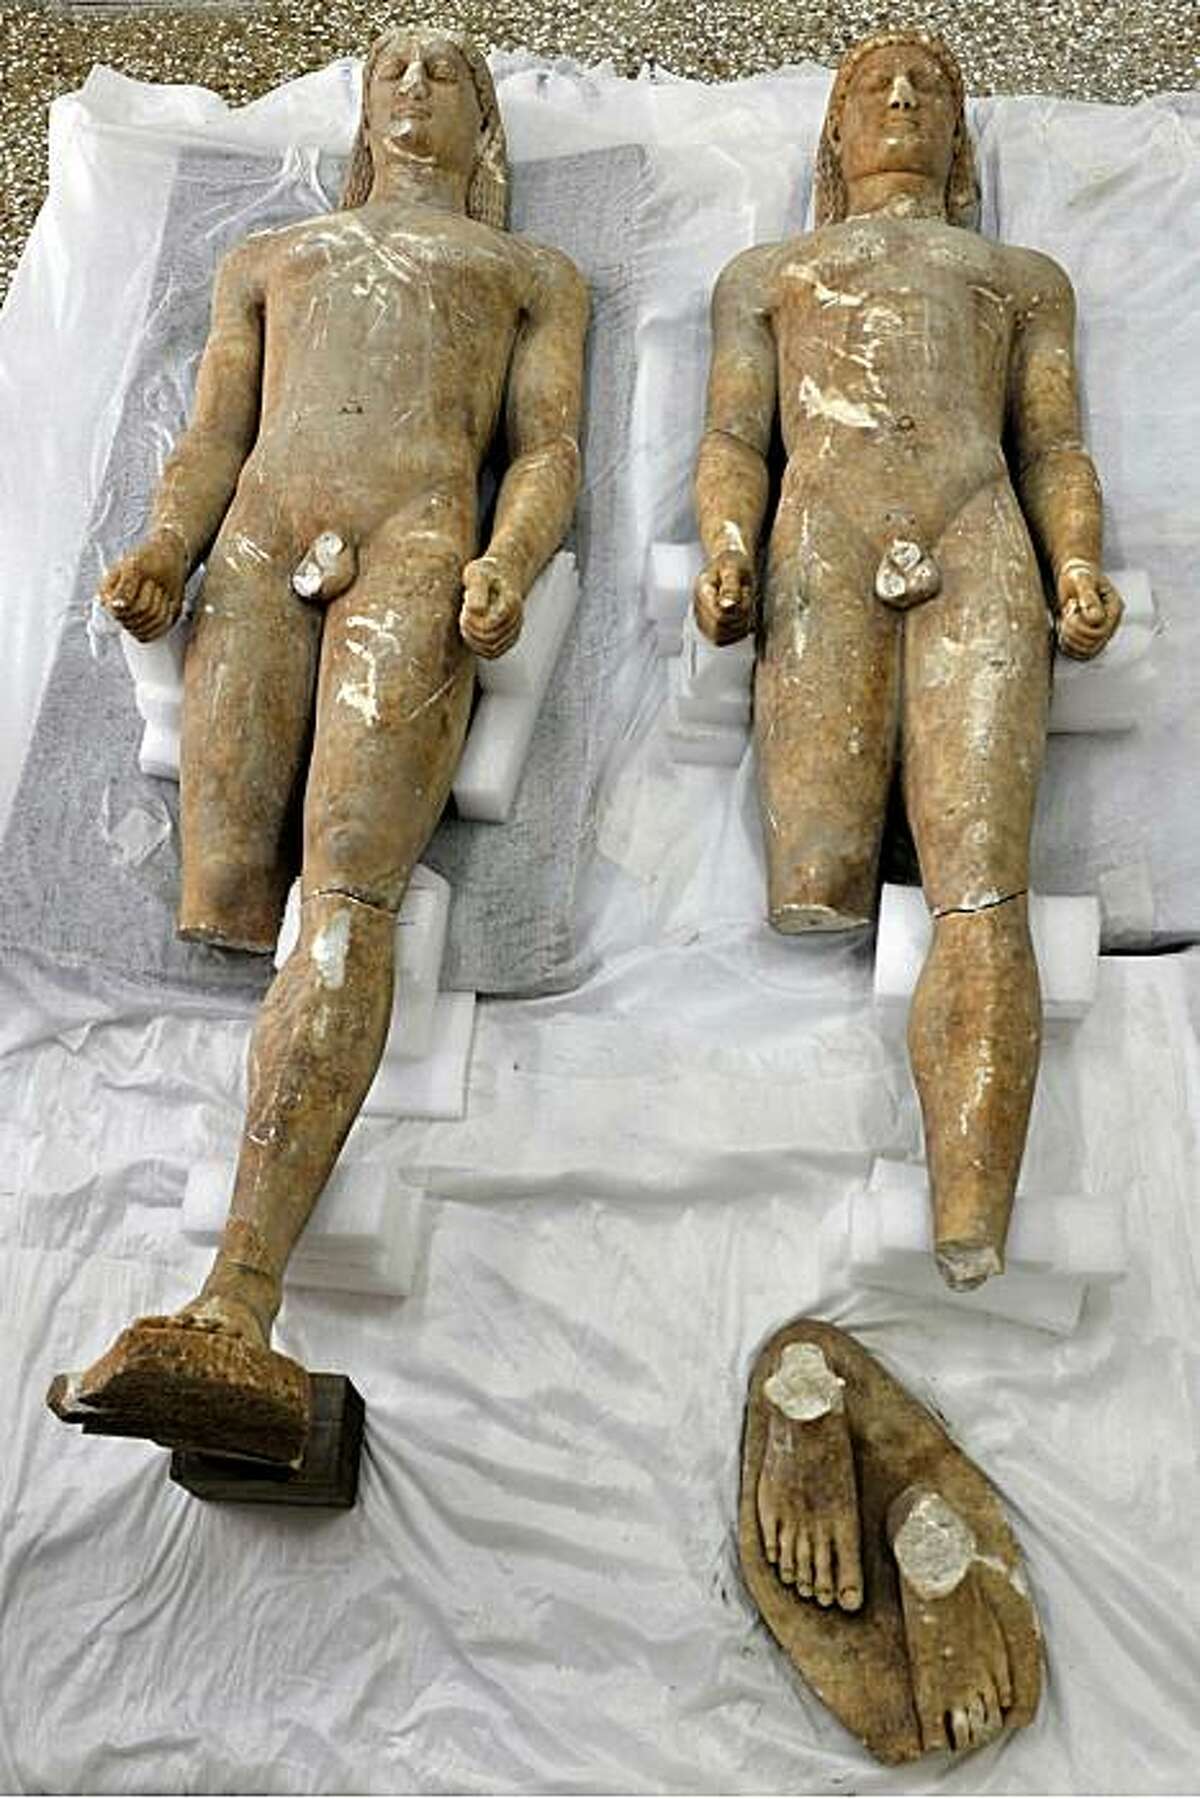 'Kouros' marble male statues dated from the 6th century BC are presented to the media at a workshop at the Archaeological museum of Athens on May 18, 2010. The two statues were found by police in the hands of illegal antique dealers in the area of Corinthon May 14.